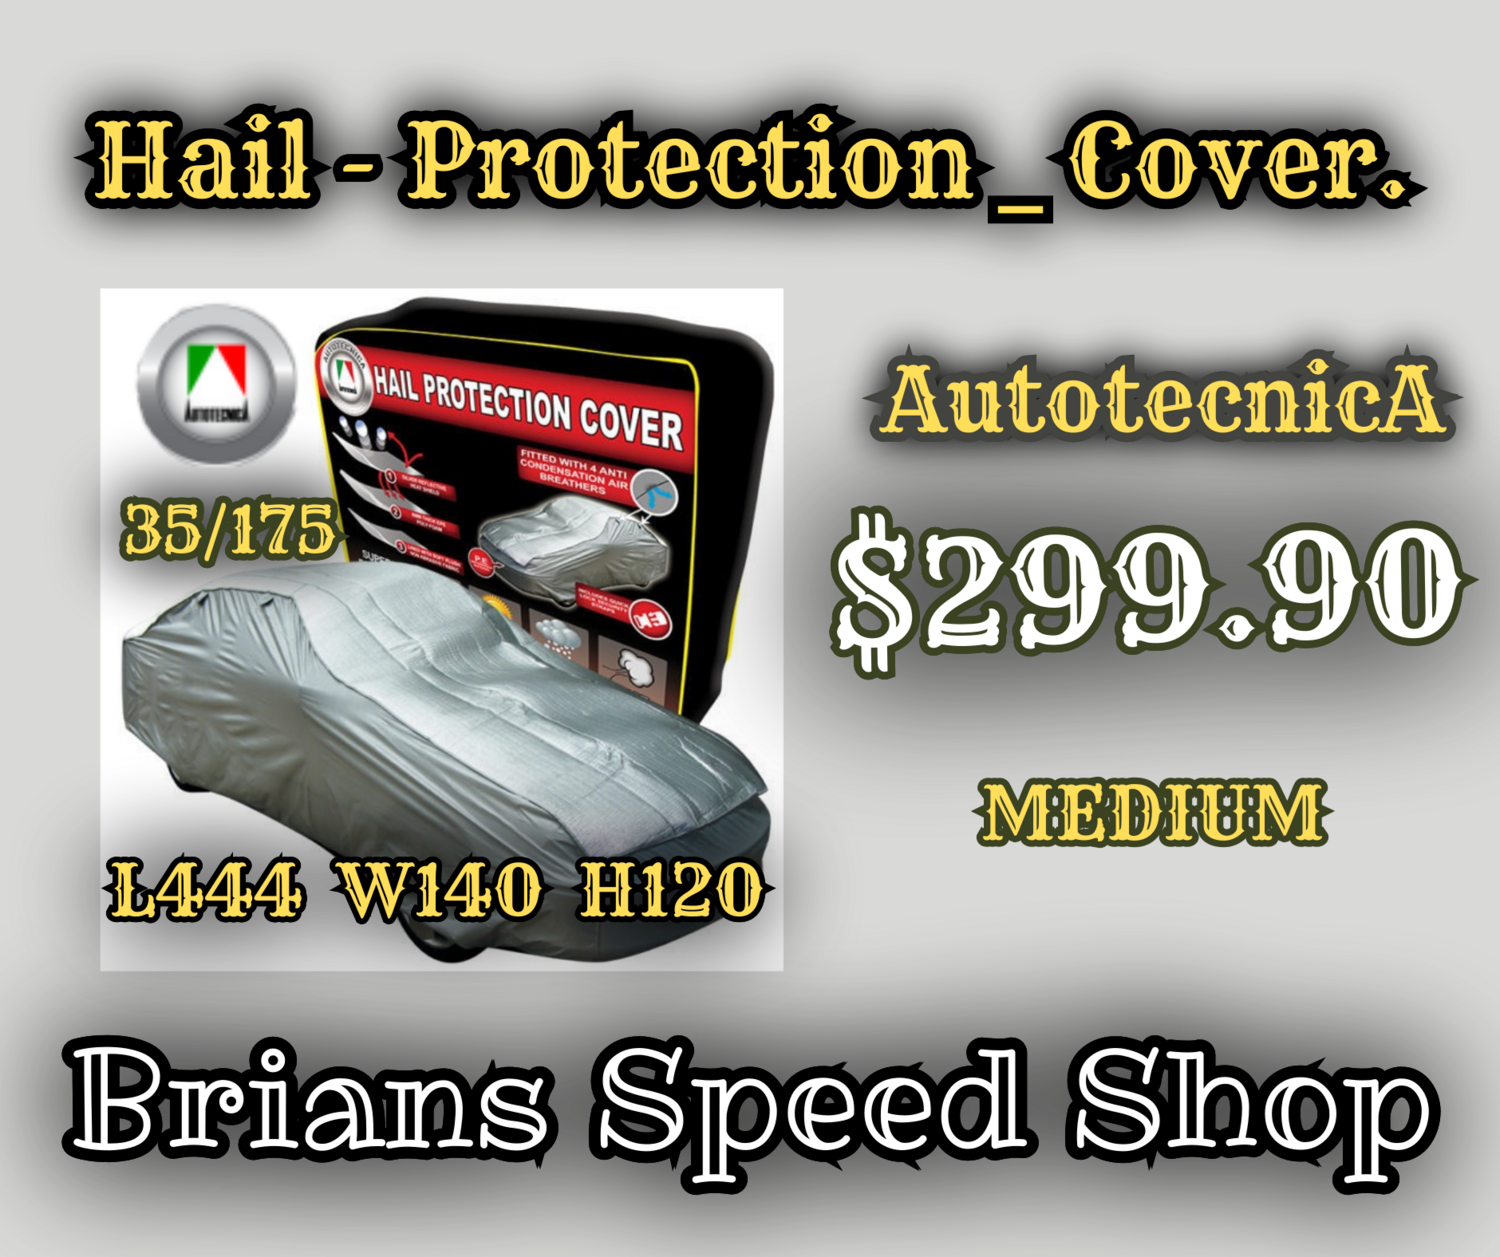 Evolution   35/175 - 4.4m  Hail Protection  Medium Size Waterproof  Car  Cover  Free Shipping $299.90. SKU